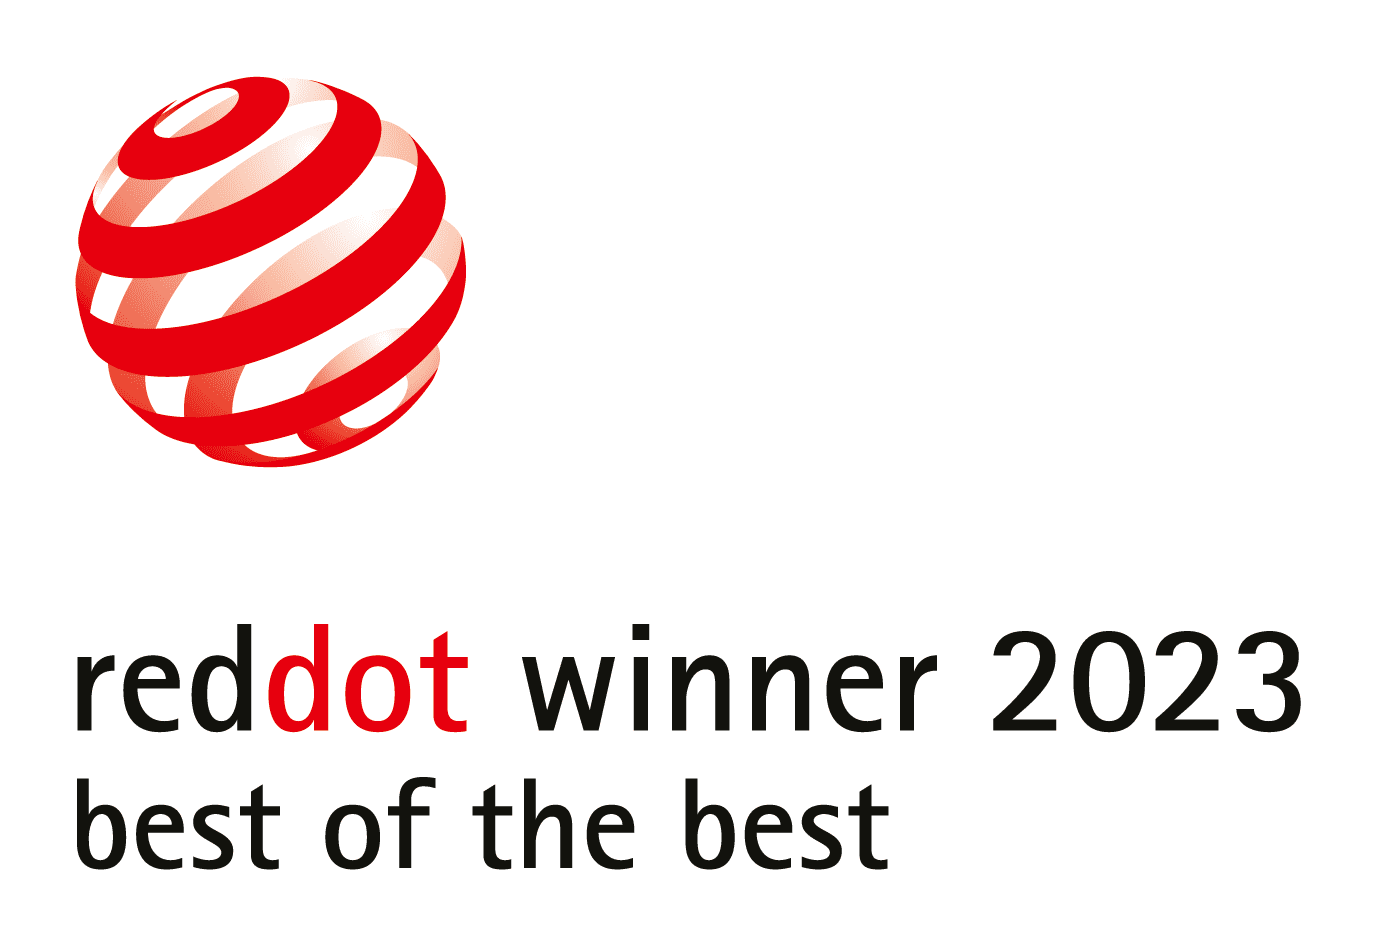 RDW Best of the best